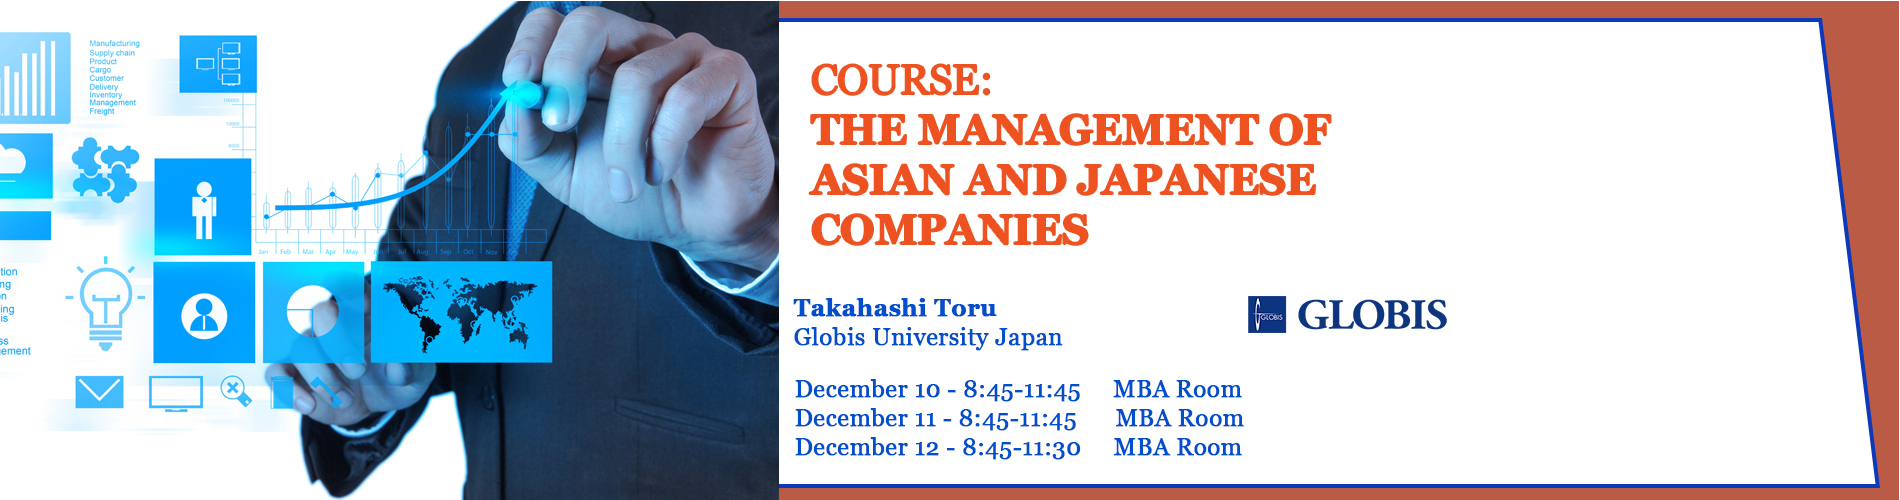 10.12.2019 - Management of Asian and Japanese